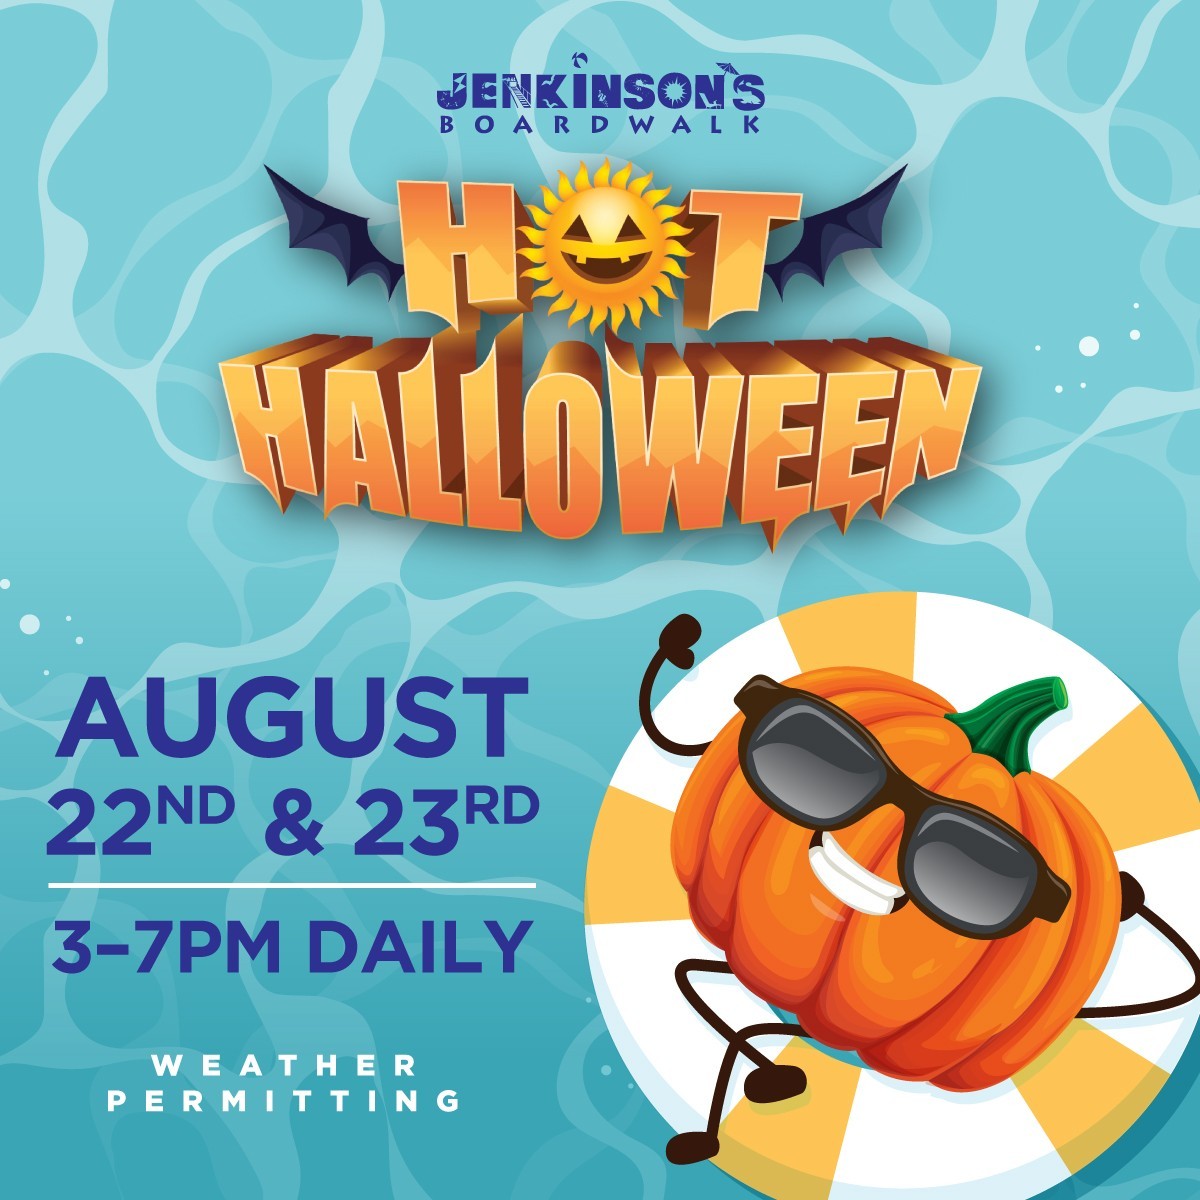 hot halloween at jenkinson's boardwalk august 22nd and 23rd from 3-7pm